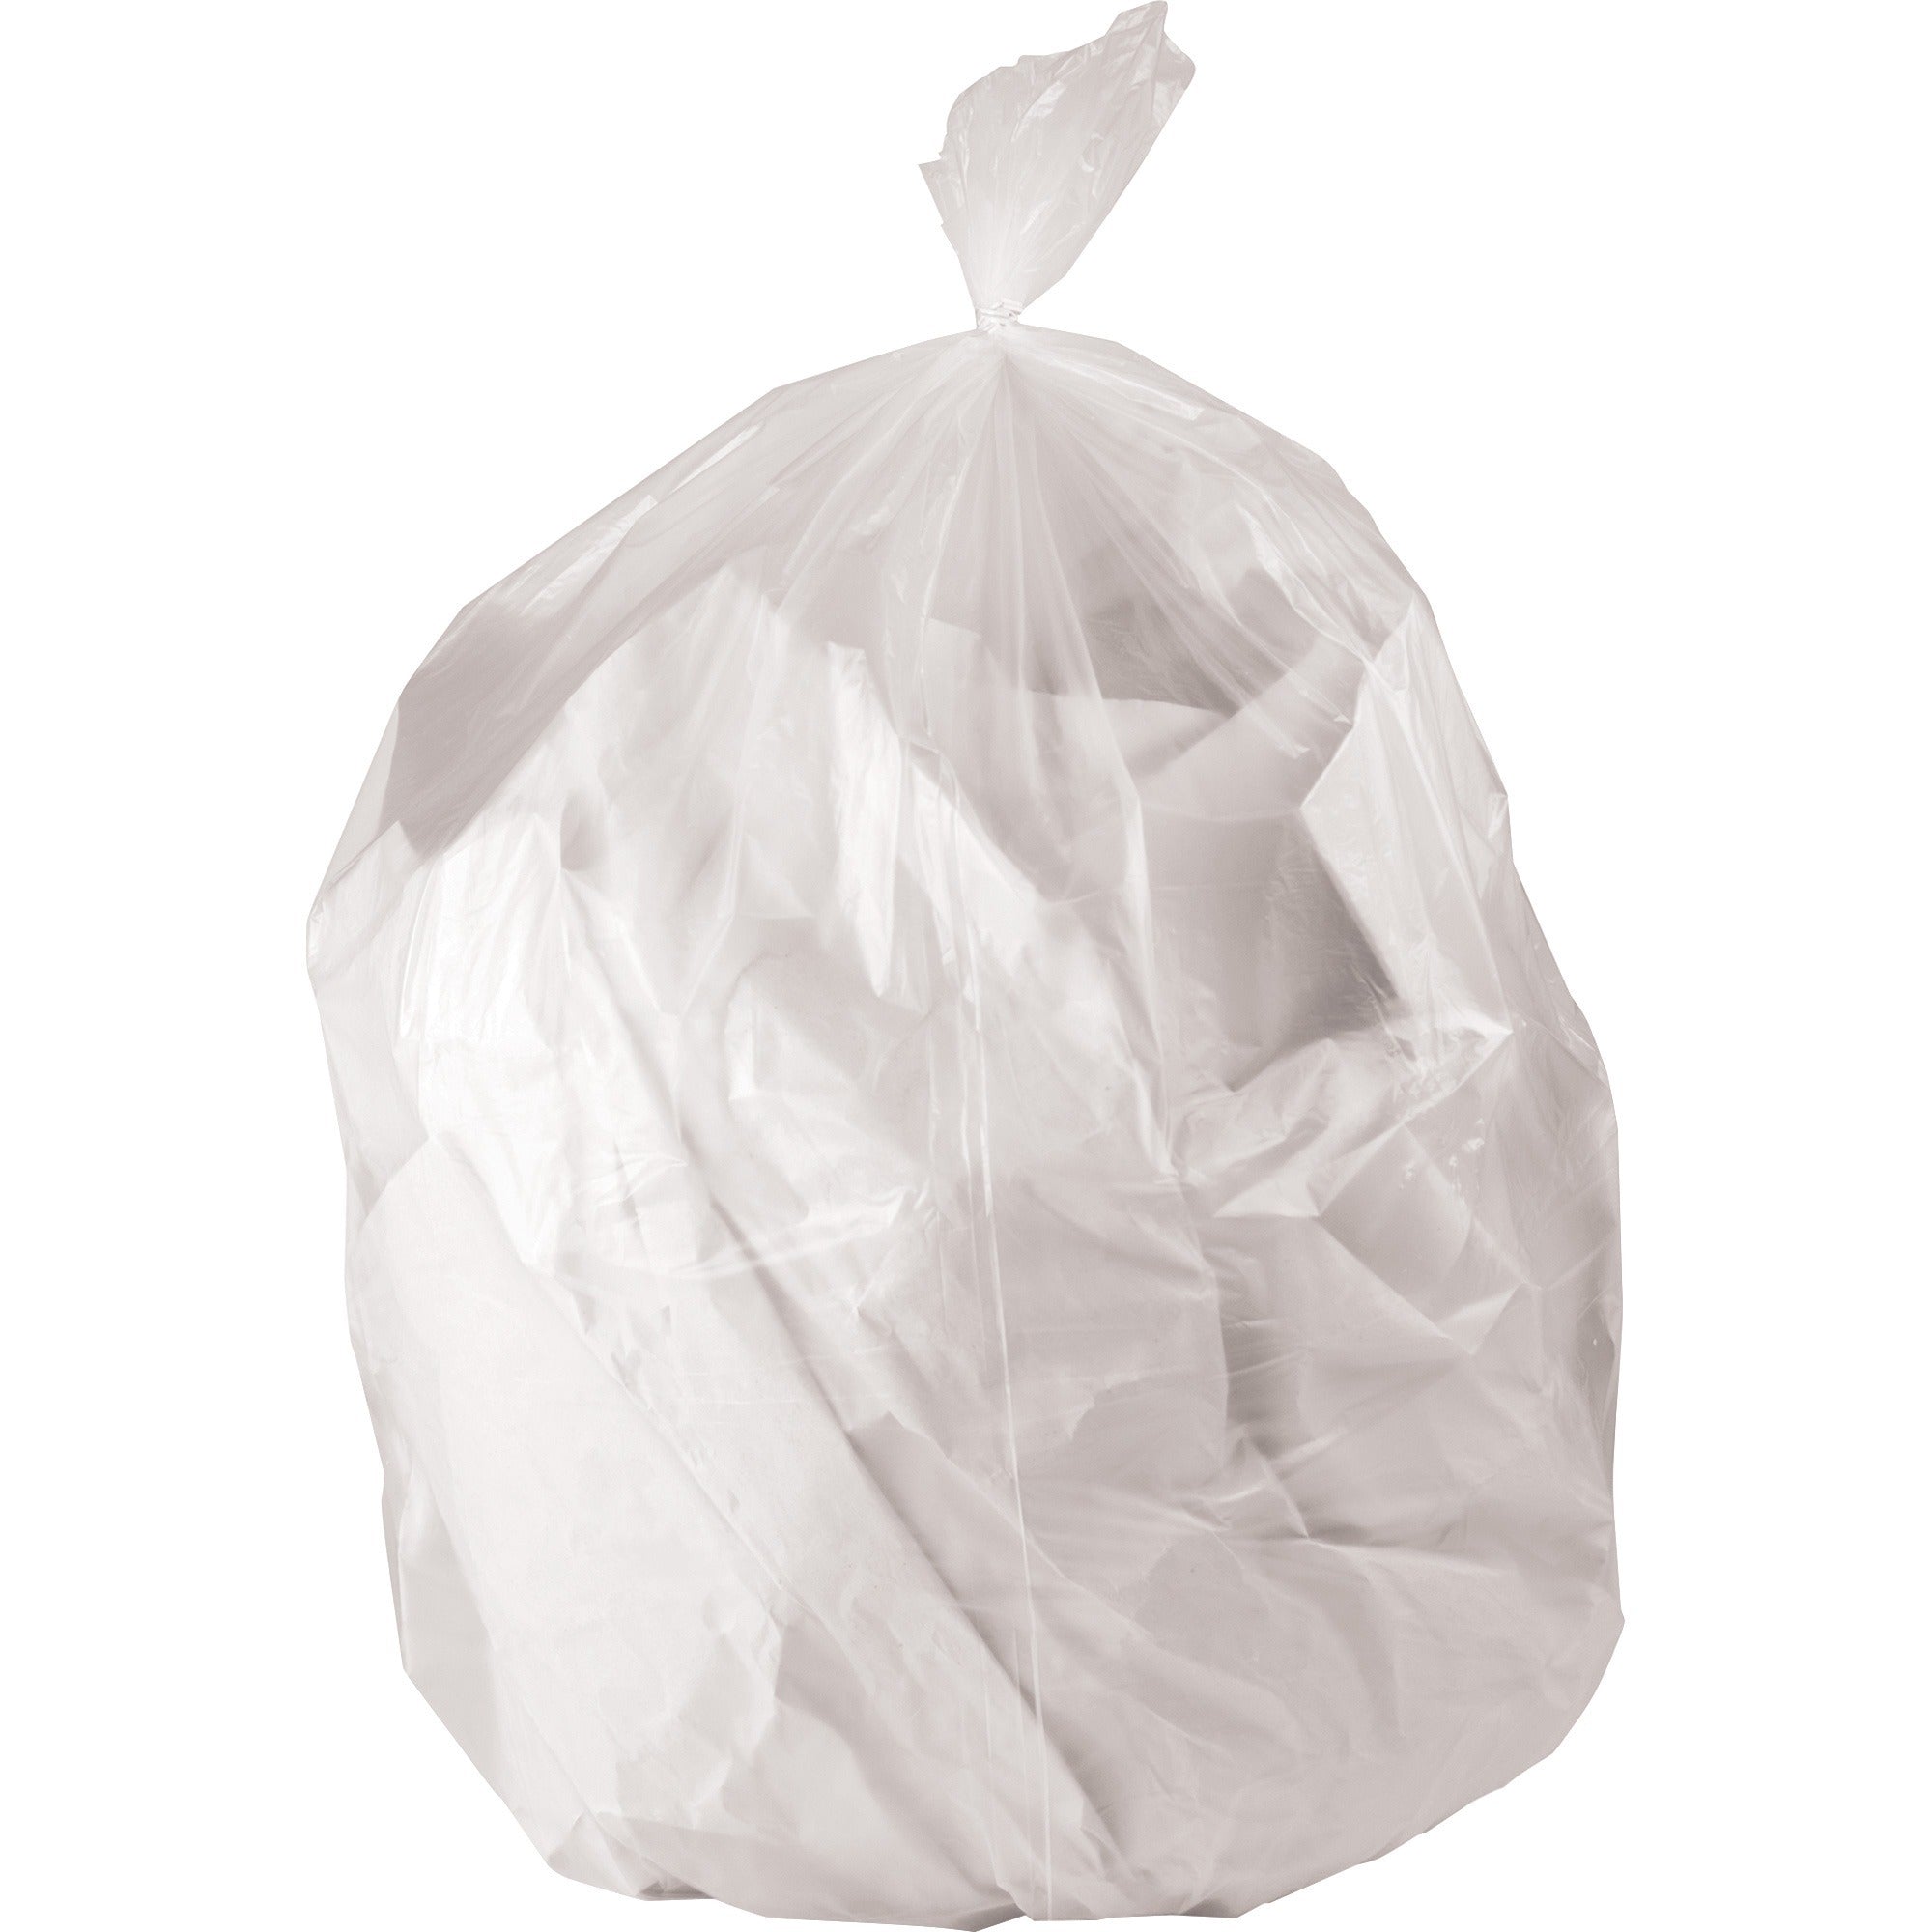 genuine-joe-strong-economical-trash-bags-60-gal-capacity-38-width-x-60-length-055-mil-14-micron-thickness-clear-resin-200-carton-waste-disposal_gjo02857 - 1